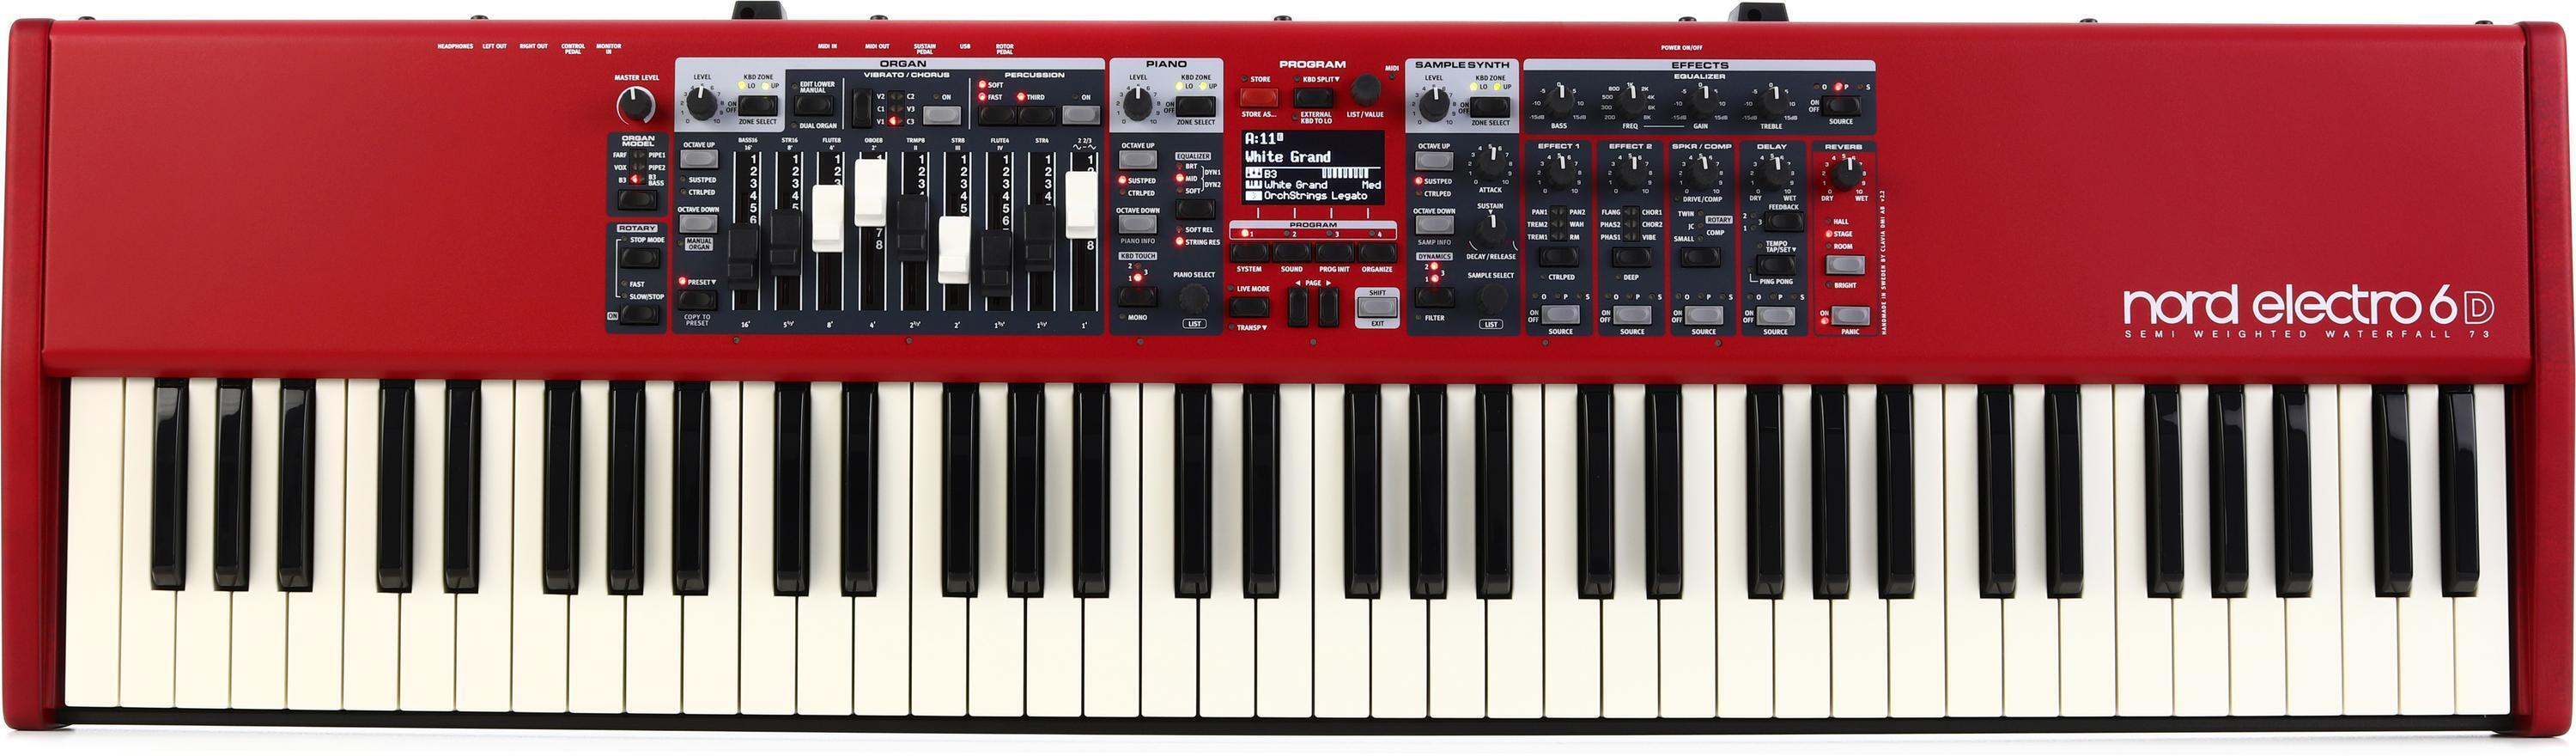 Nord Electro 4D | Sweetwater